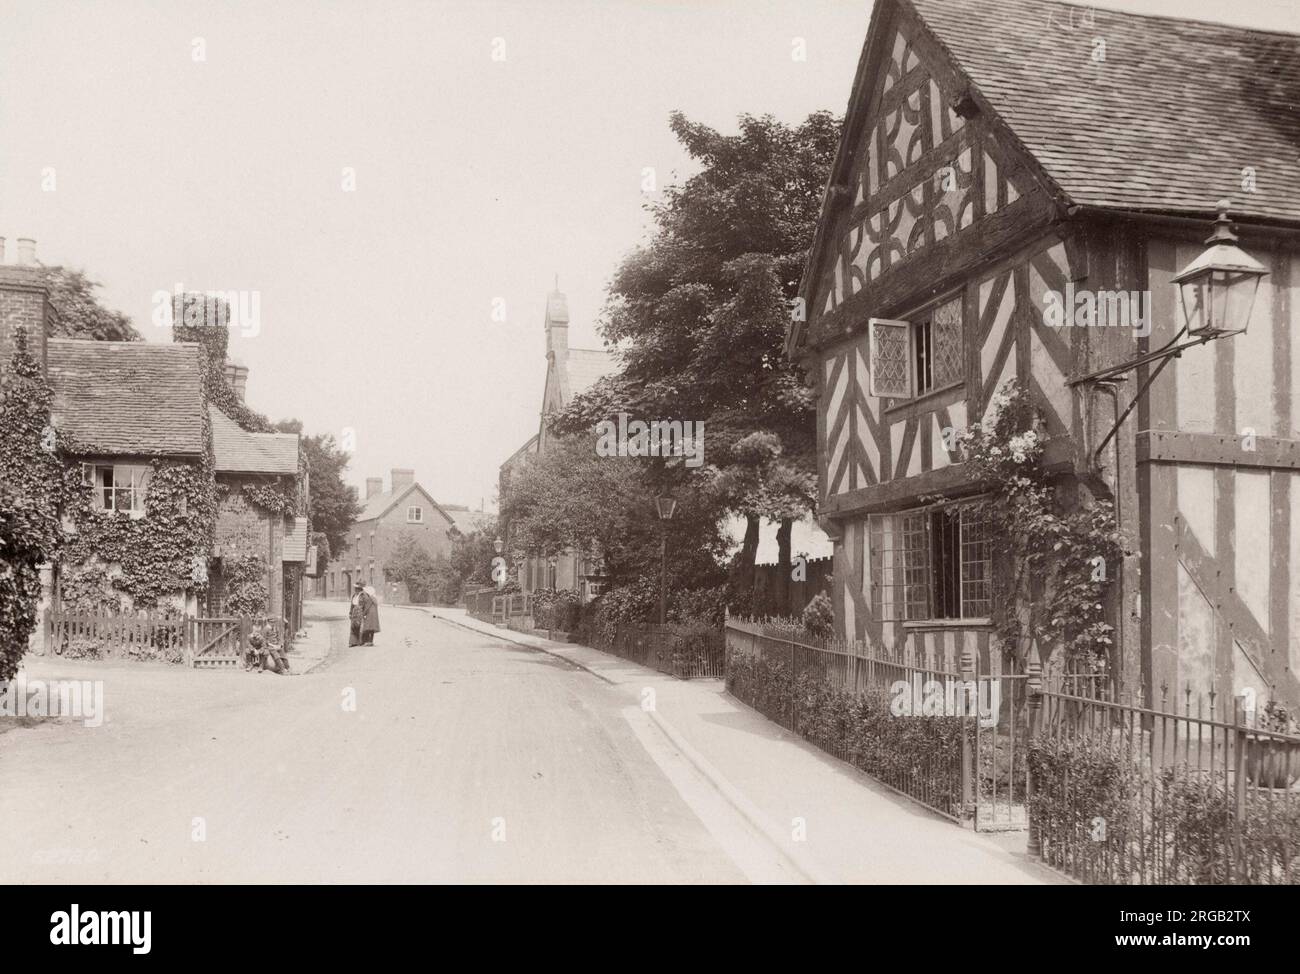 Vintage 19th century photograph: Church Stretton is a market town in Shropshire, England, 13 miles south of Shrewsbury and 15 miles north of Ludlow. Stock Photo